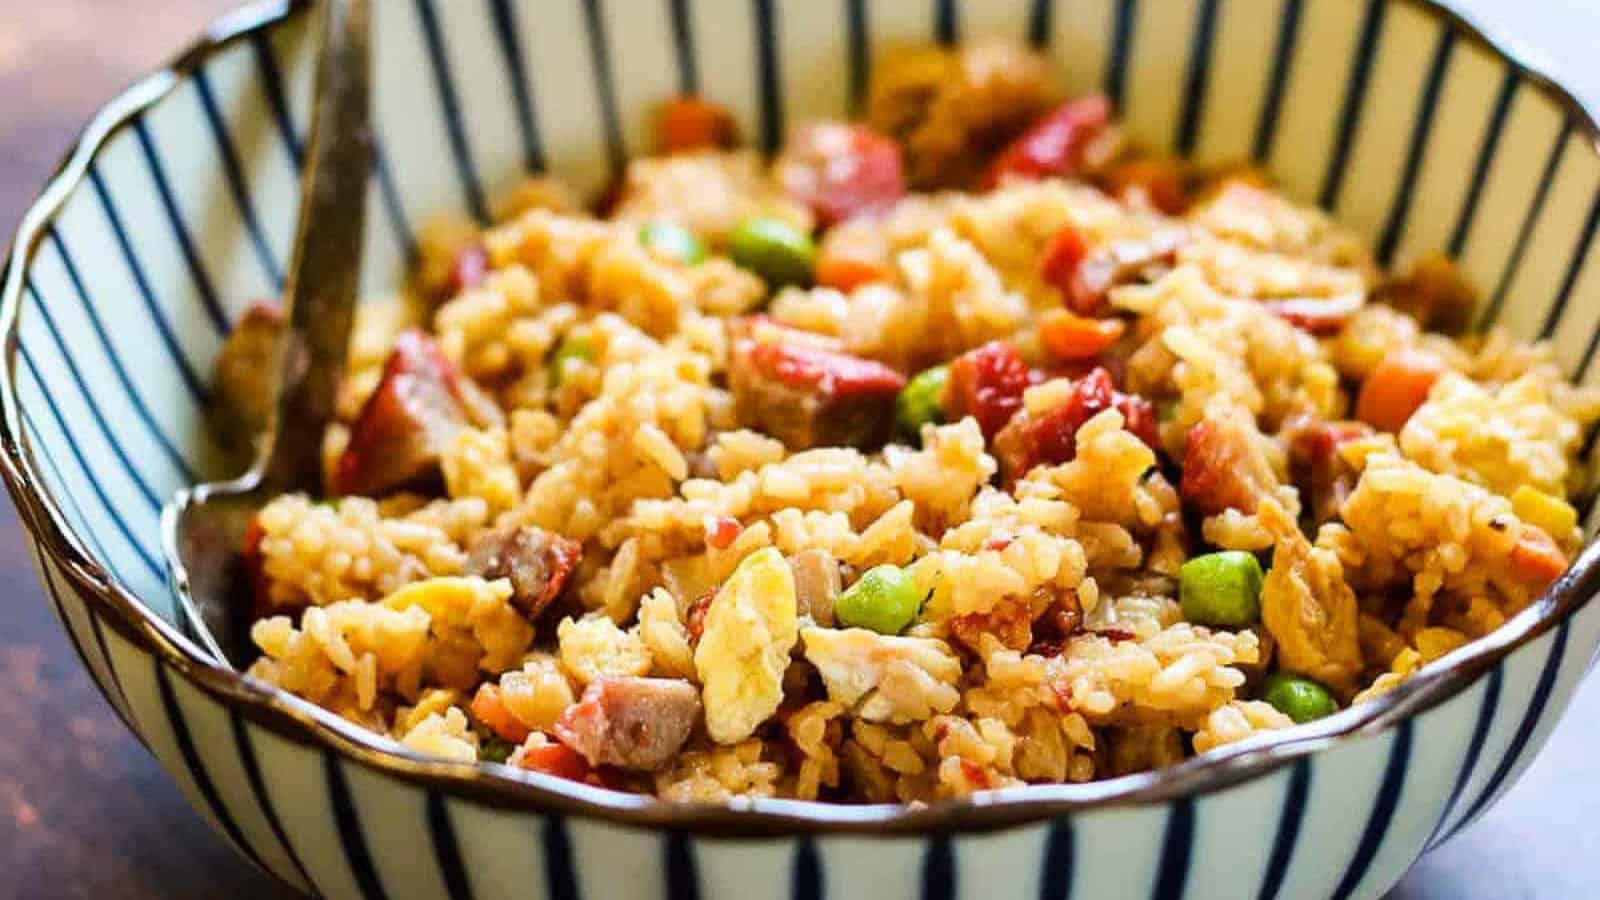 Pork fried rice in a blue and white striped bowl.